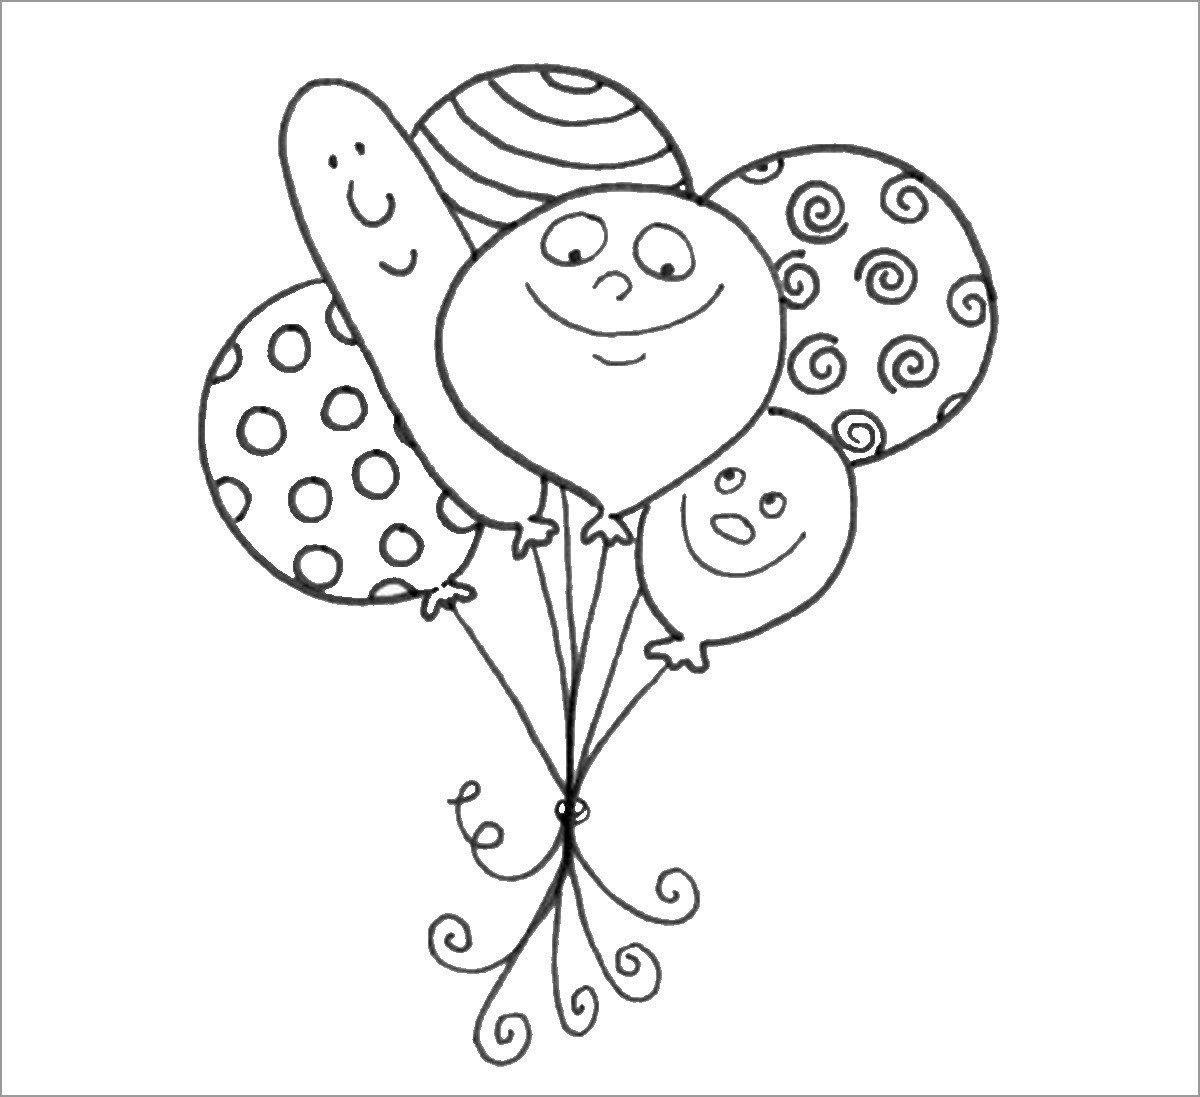 Varvara Emi - Coloring Pages for Kids: Balloon Coloring Pages